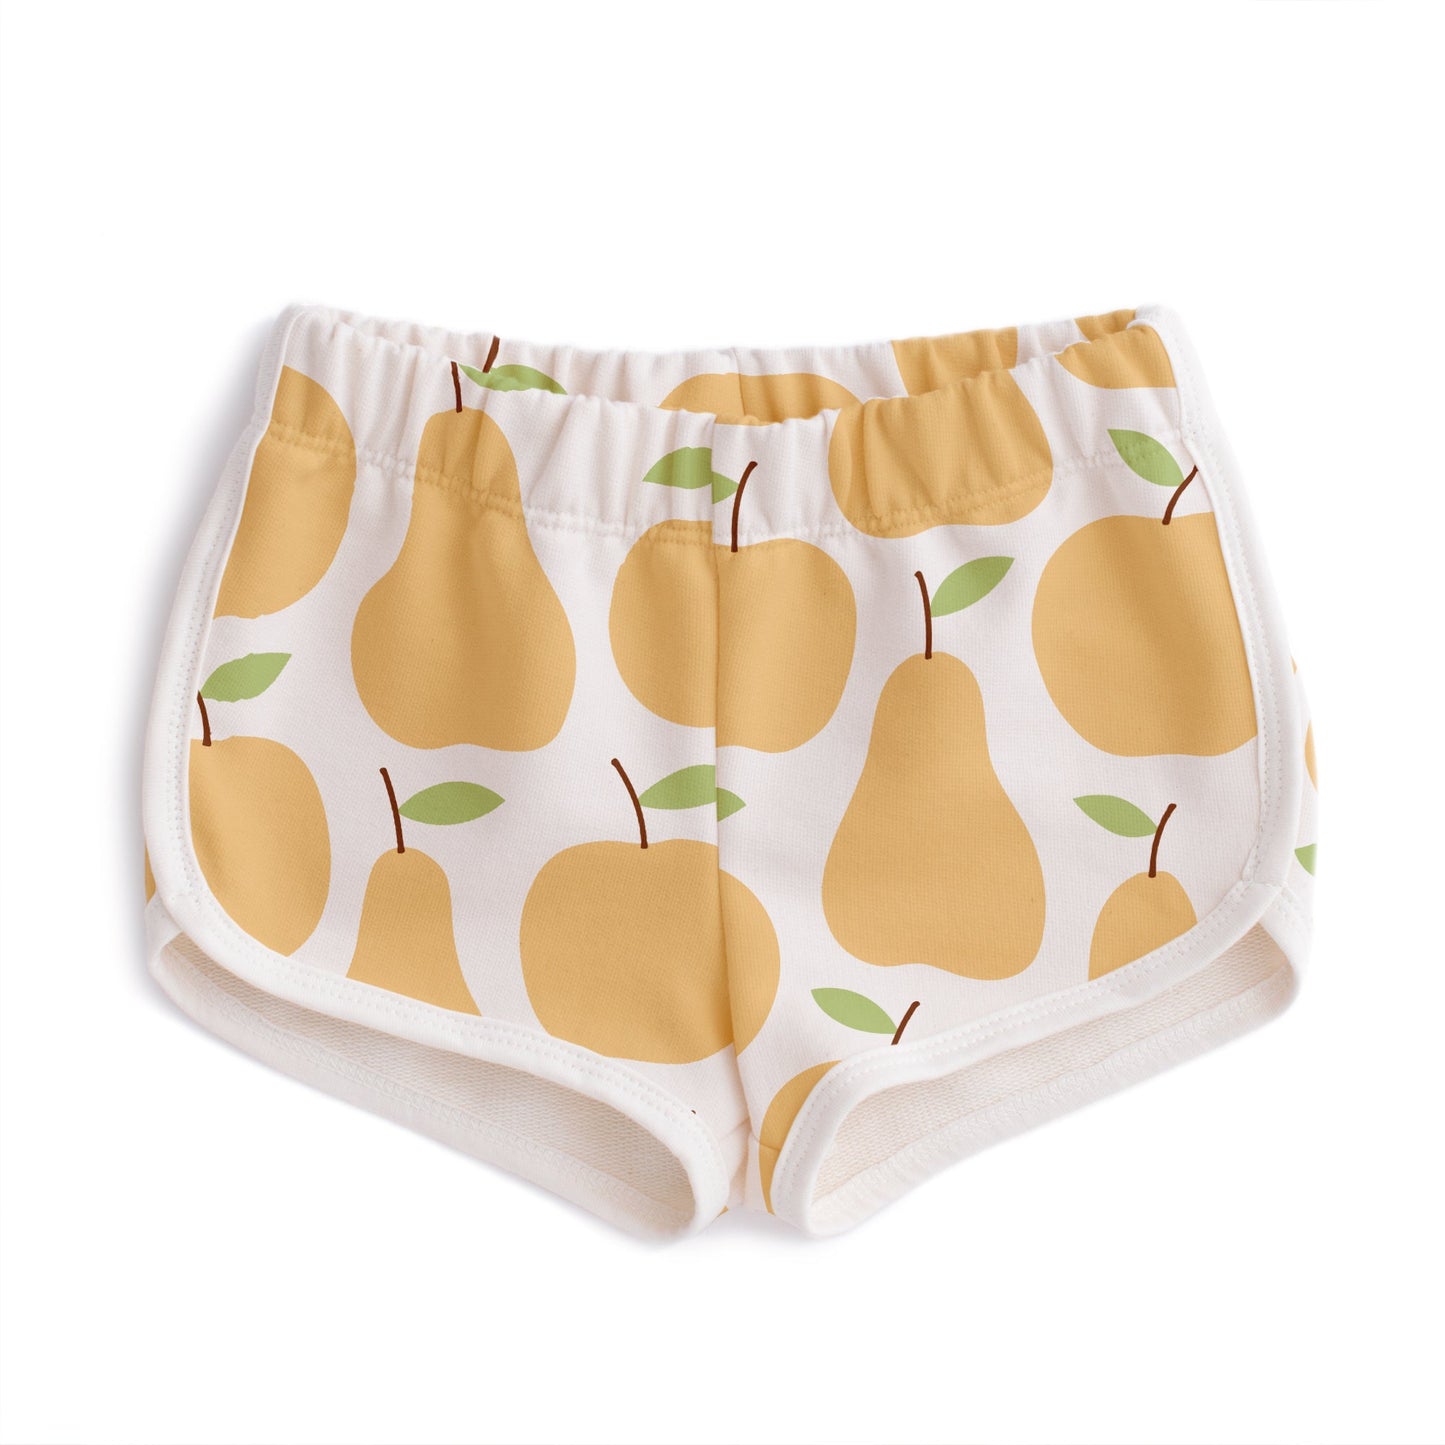 French Terry Shorts - Apples & Pears Yellow